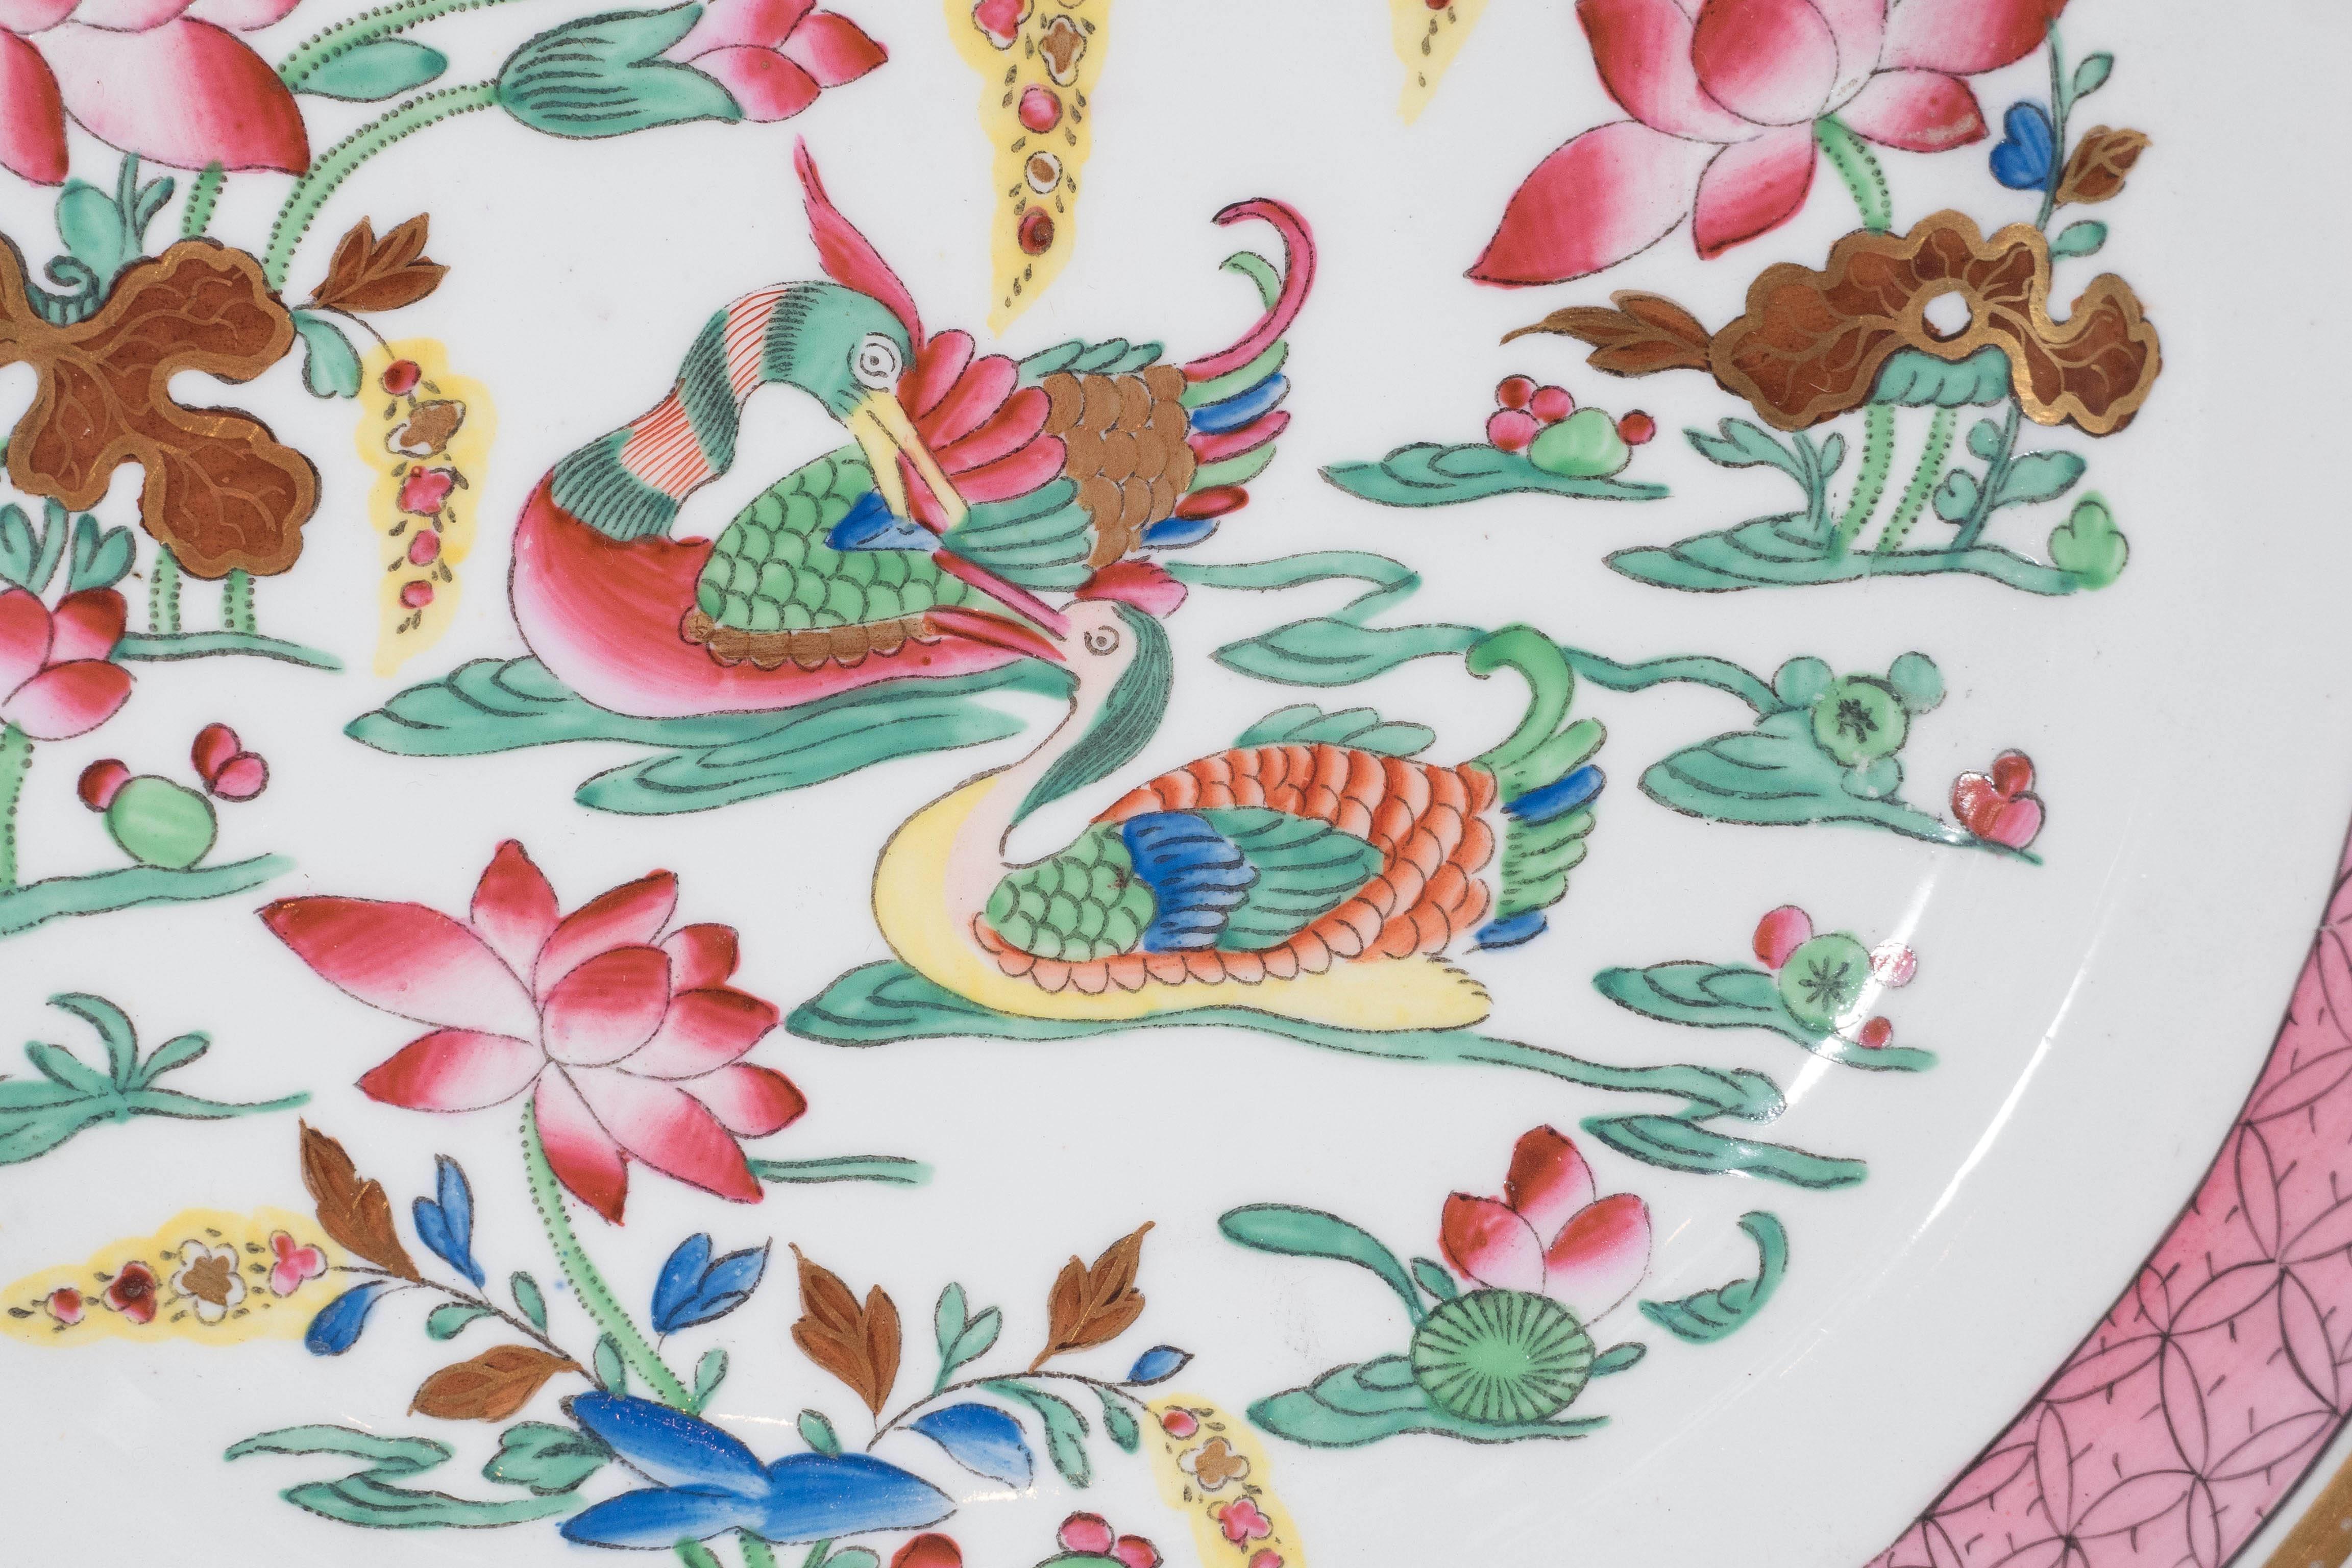 We are pleased to offer this fine set of 16 Spode antique porcelain dishes in the Mandarin Ducks pattern painted with lively Famille Rose colors showing a chinoiserie scene with a pair of Mandarin ducks swimming near pink water lilies. In Chinese